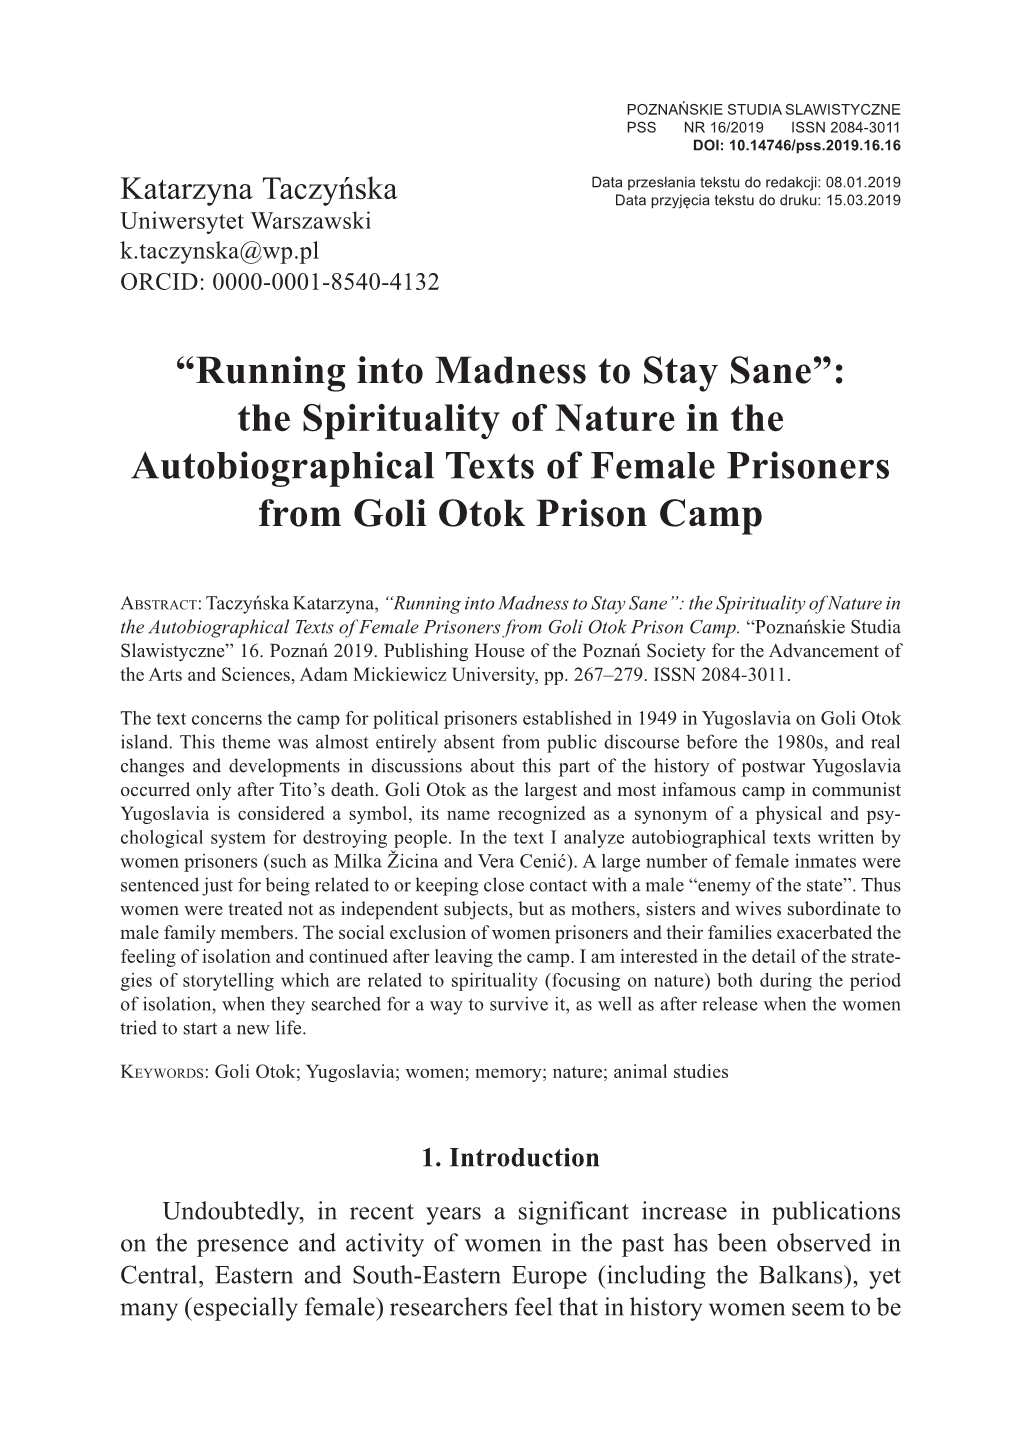 “Running Into Madness to Stay Sane”: the Spirituality of Nature in the Autobiographical Texts of Female Prisoners from Goli Otok Prison Camp